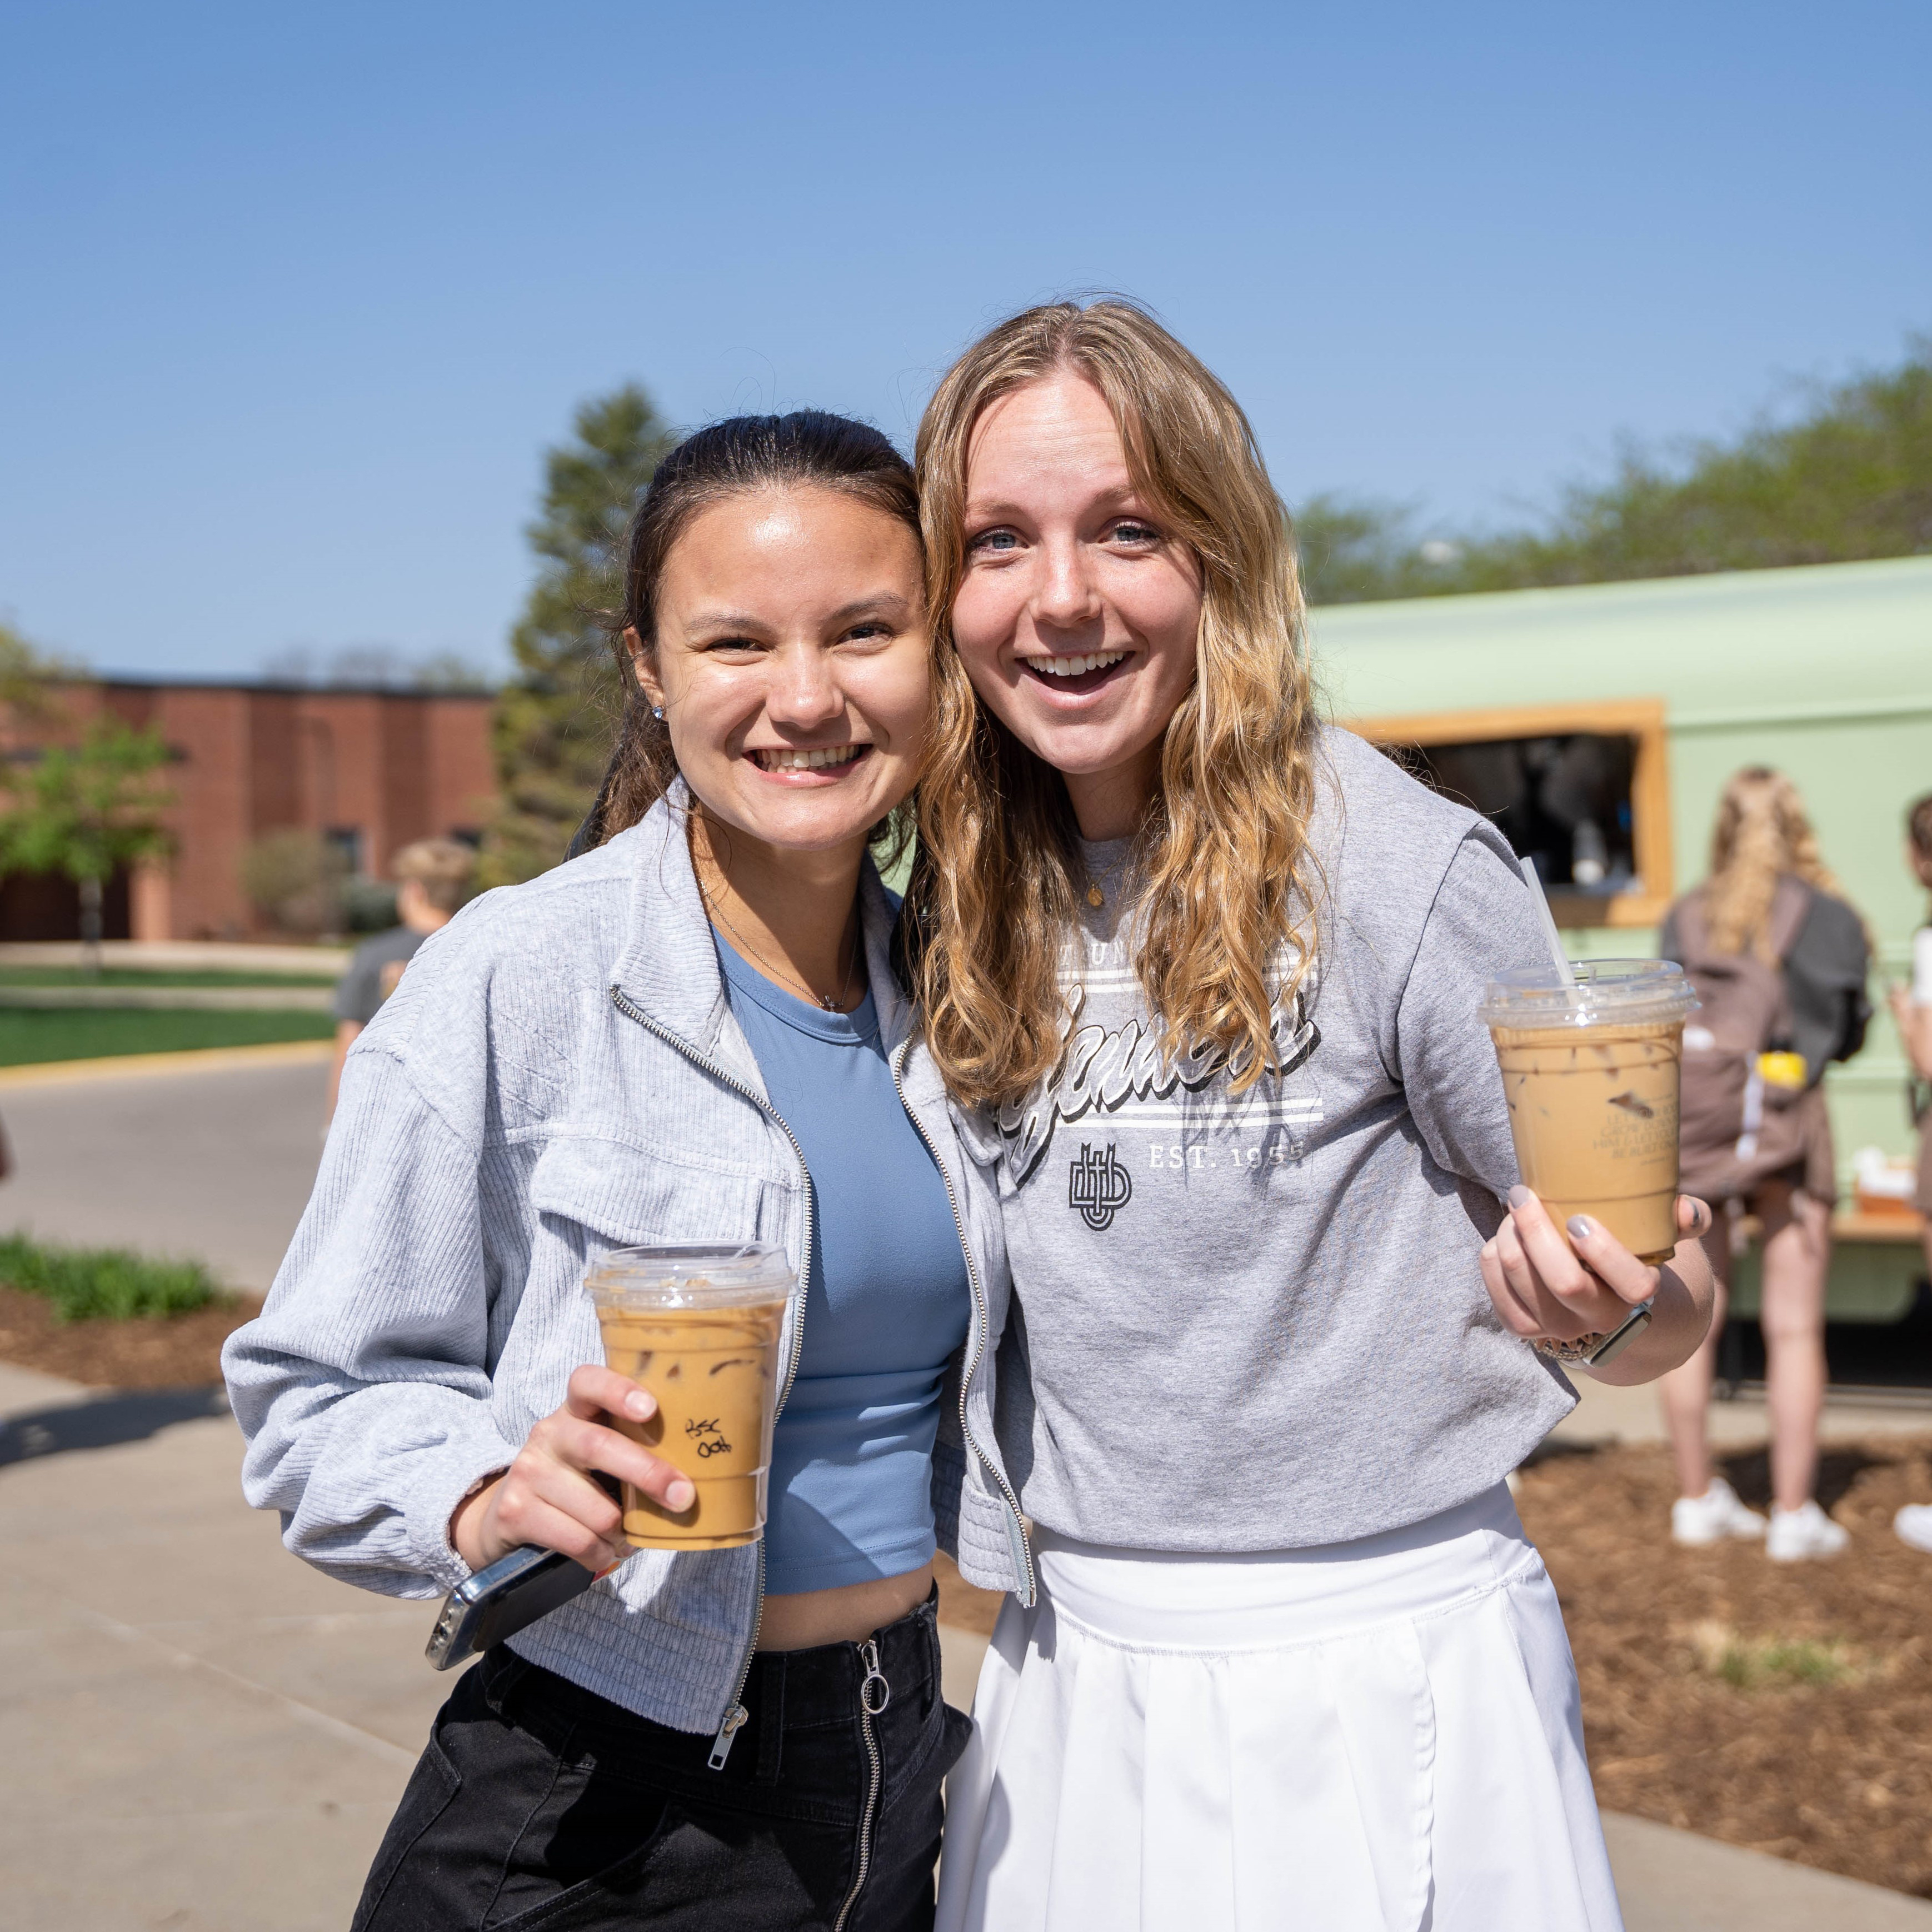 Female students drinking coffee